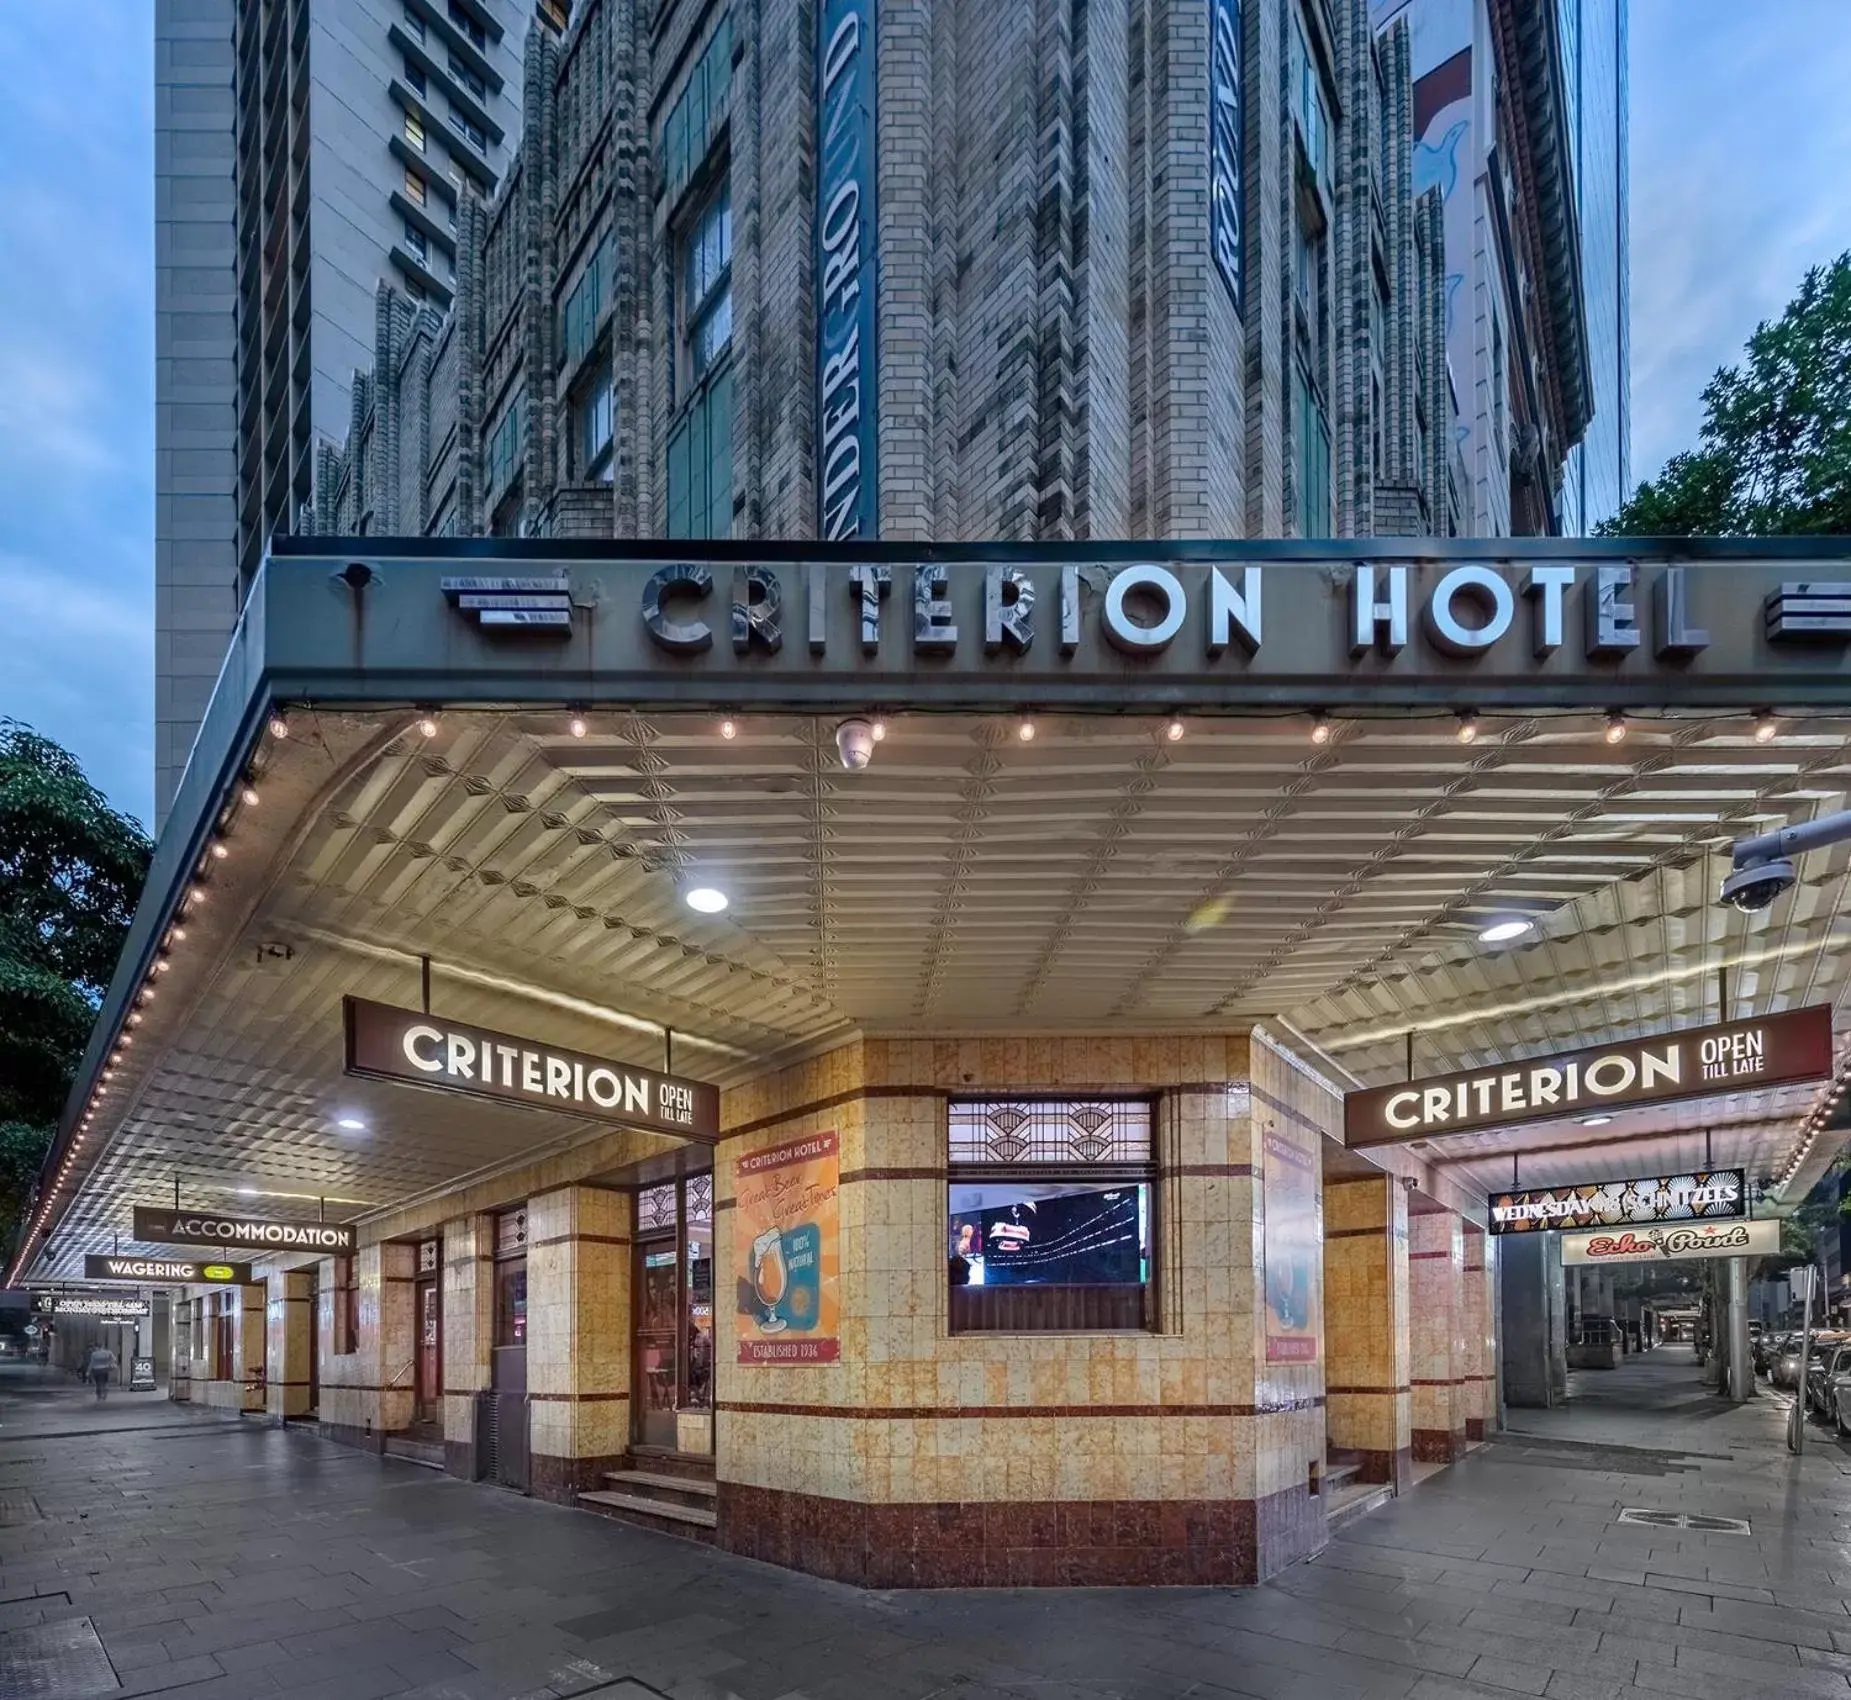 Property Building in Criterion Hotel Sydney